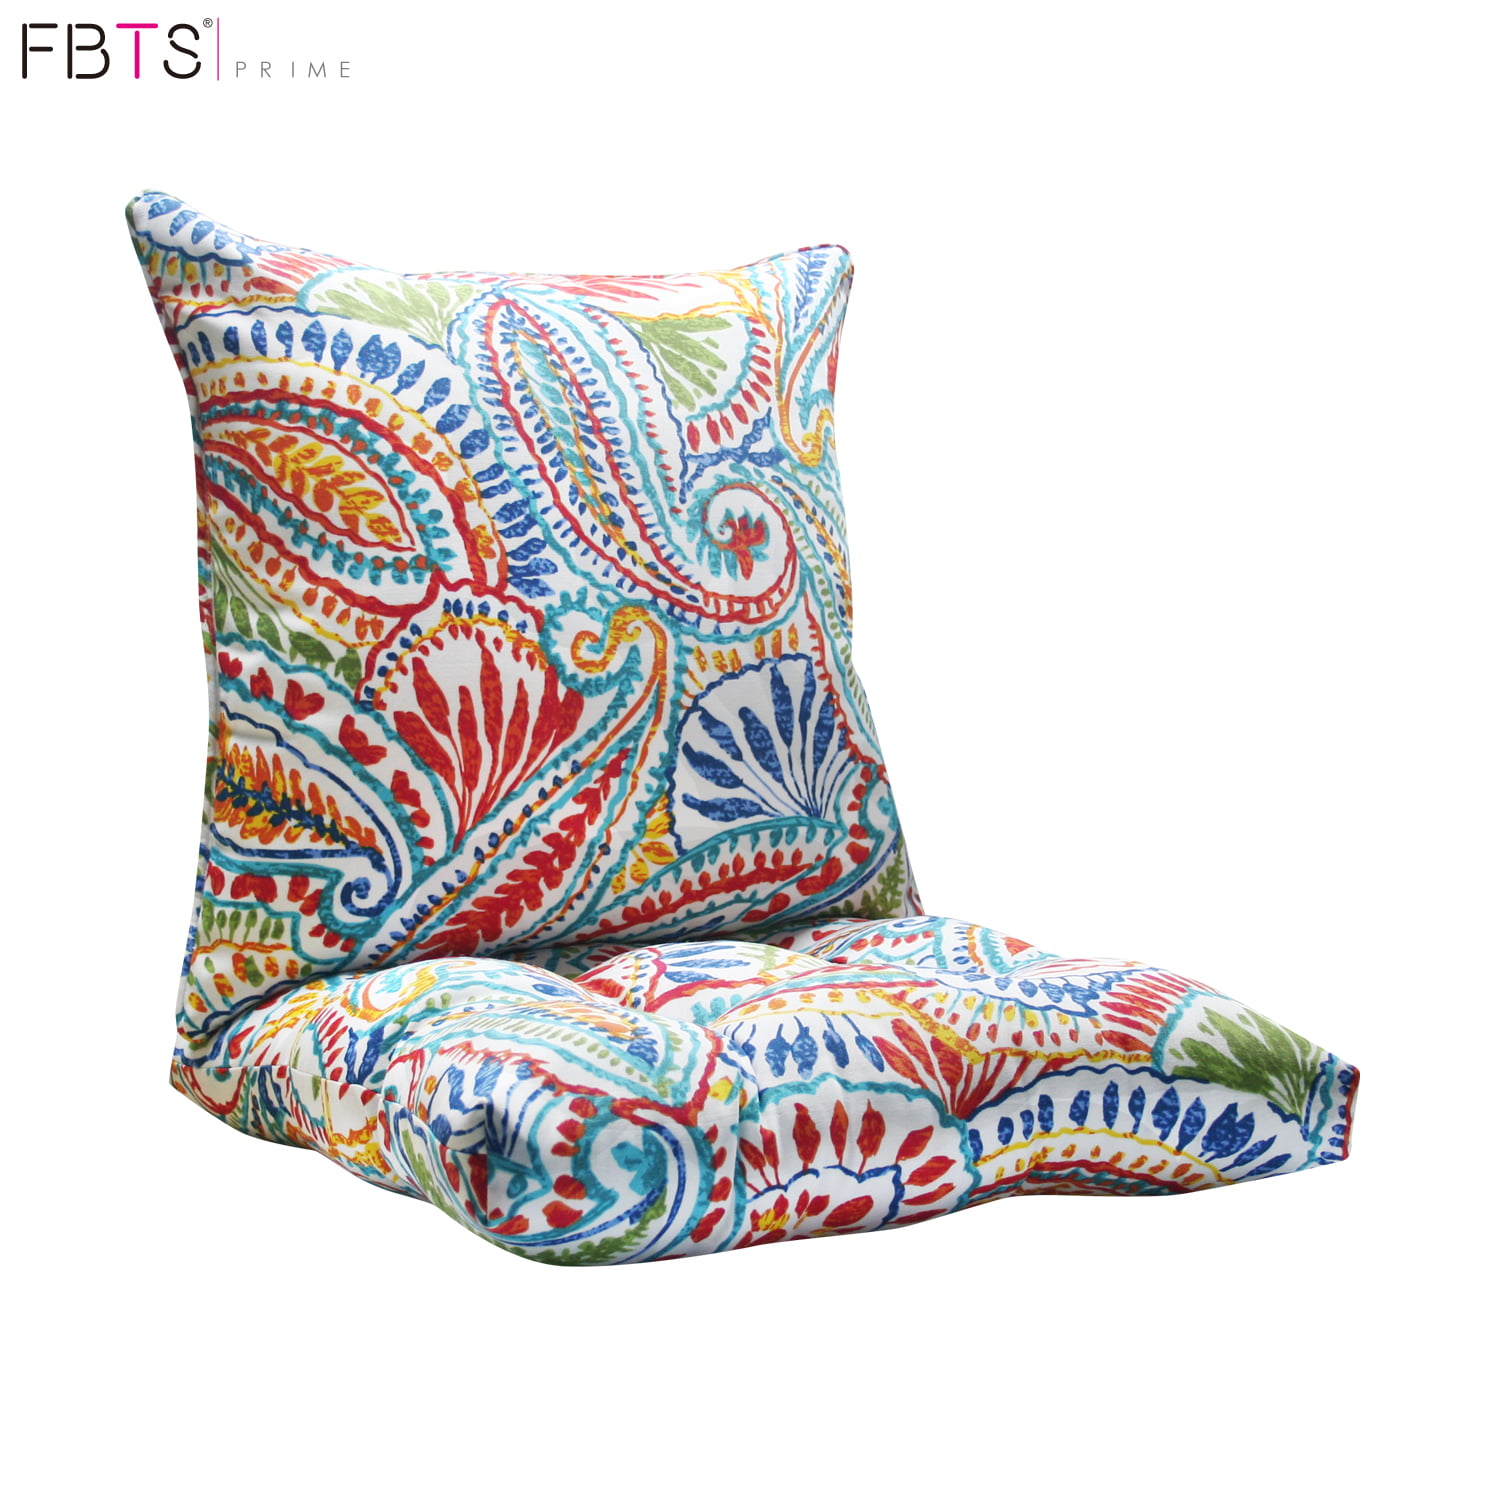 Fbts Prime Outdoor Chair Cushion And, Blue Paisley Outdoor Chair Cushions